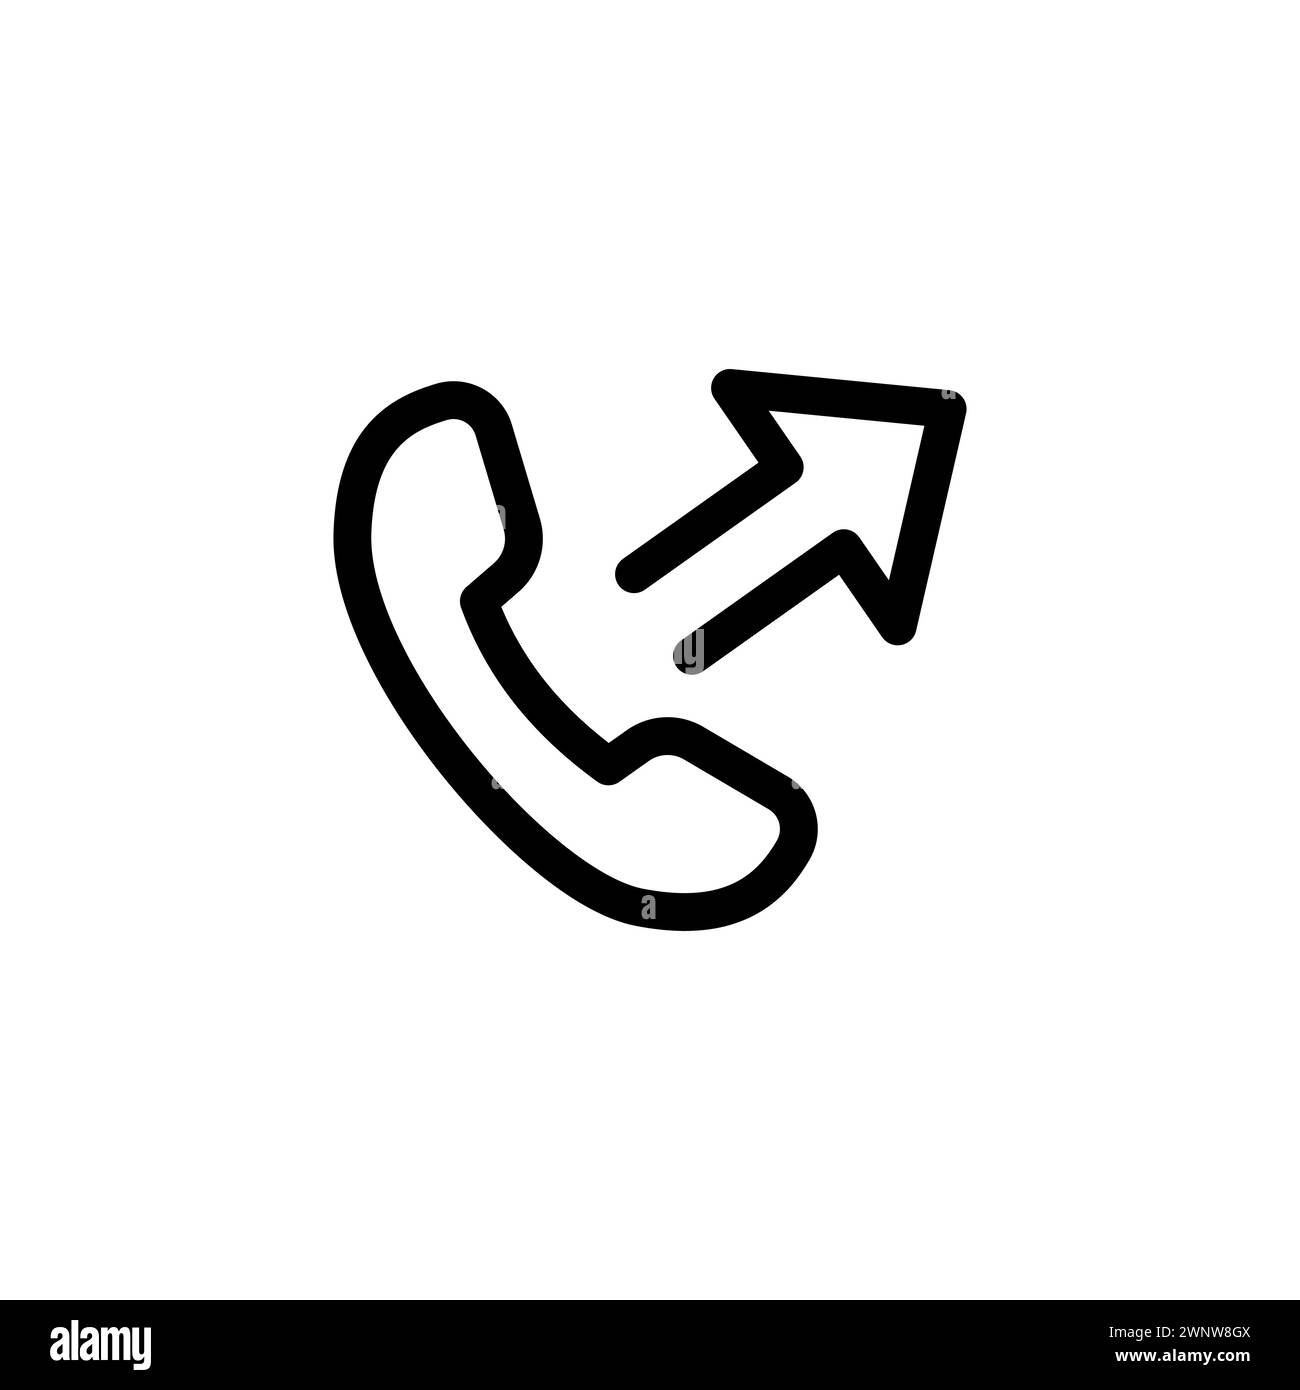 Outgoing call icon. Telephone call icons with symbol of caller, Phone sign icon. Isolated round collection of ringing phone. Flat button on black and Stock Vector